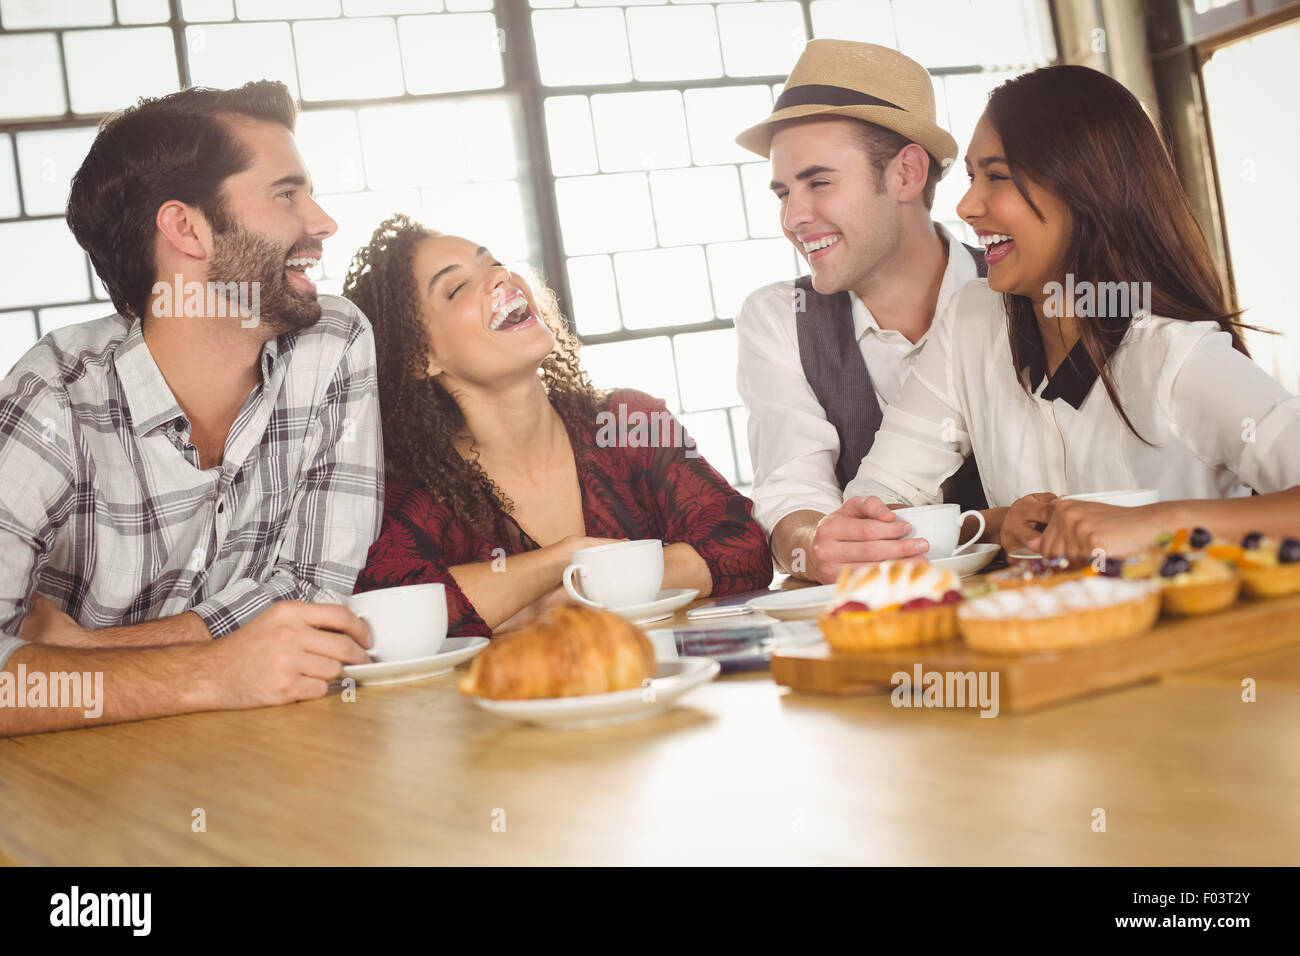 Laughing friends enjoying coffee and treats Stock Photo